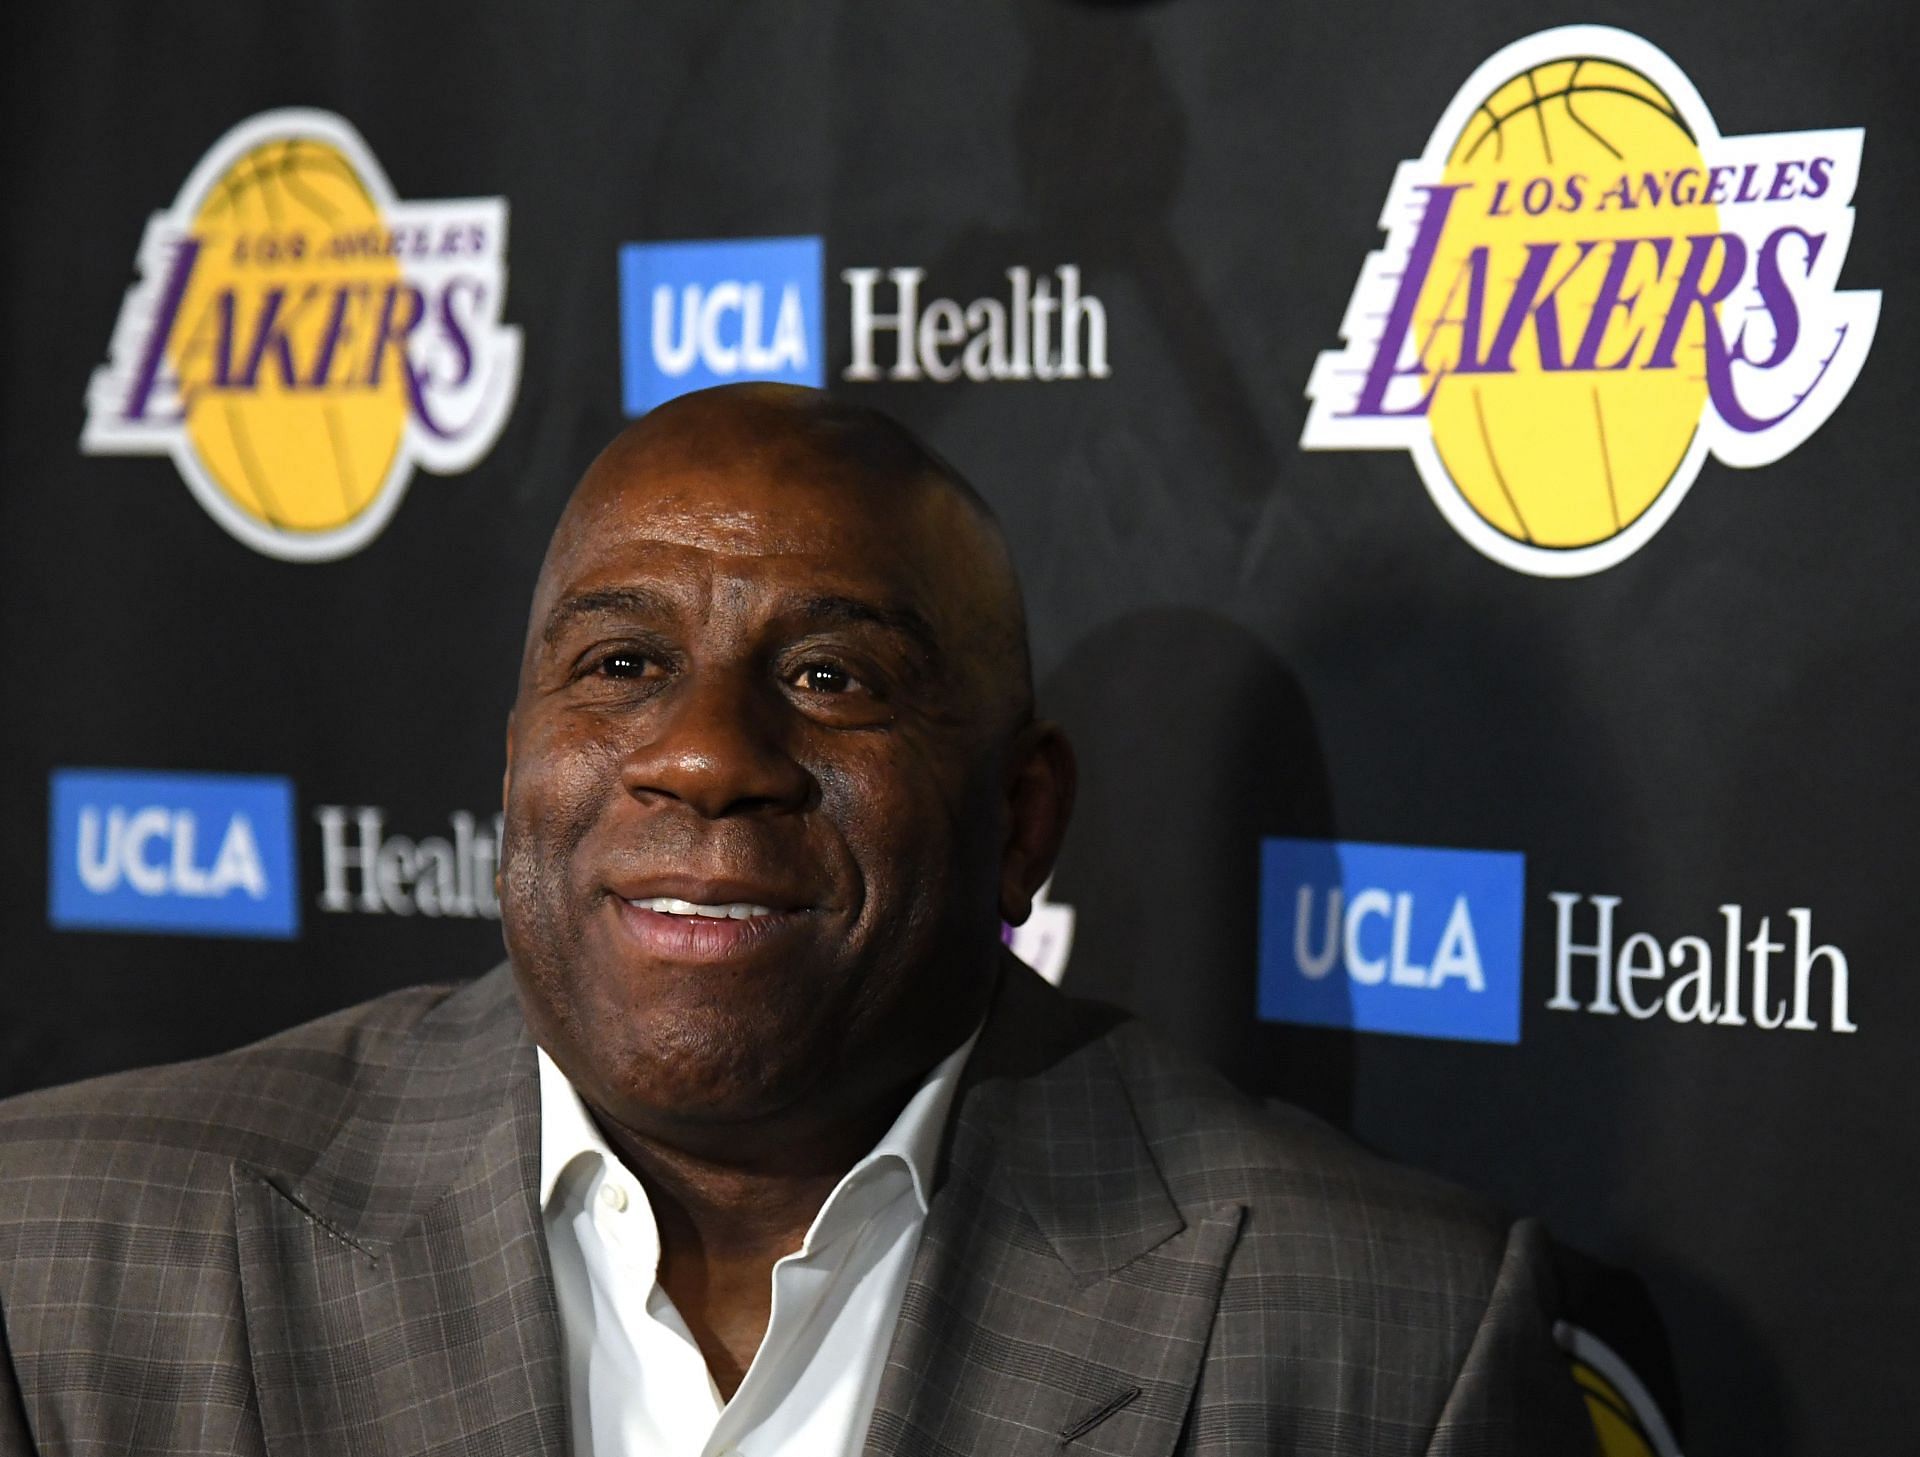 Magic Johnson during a press conference in 2019